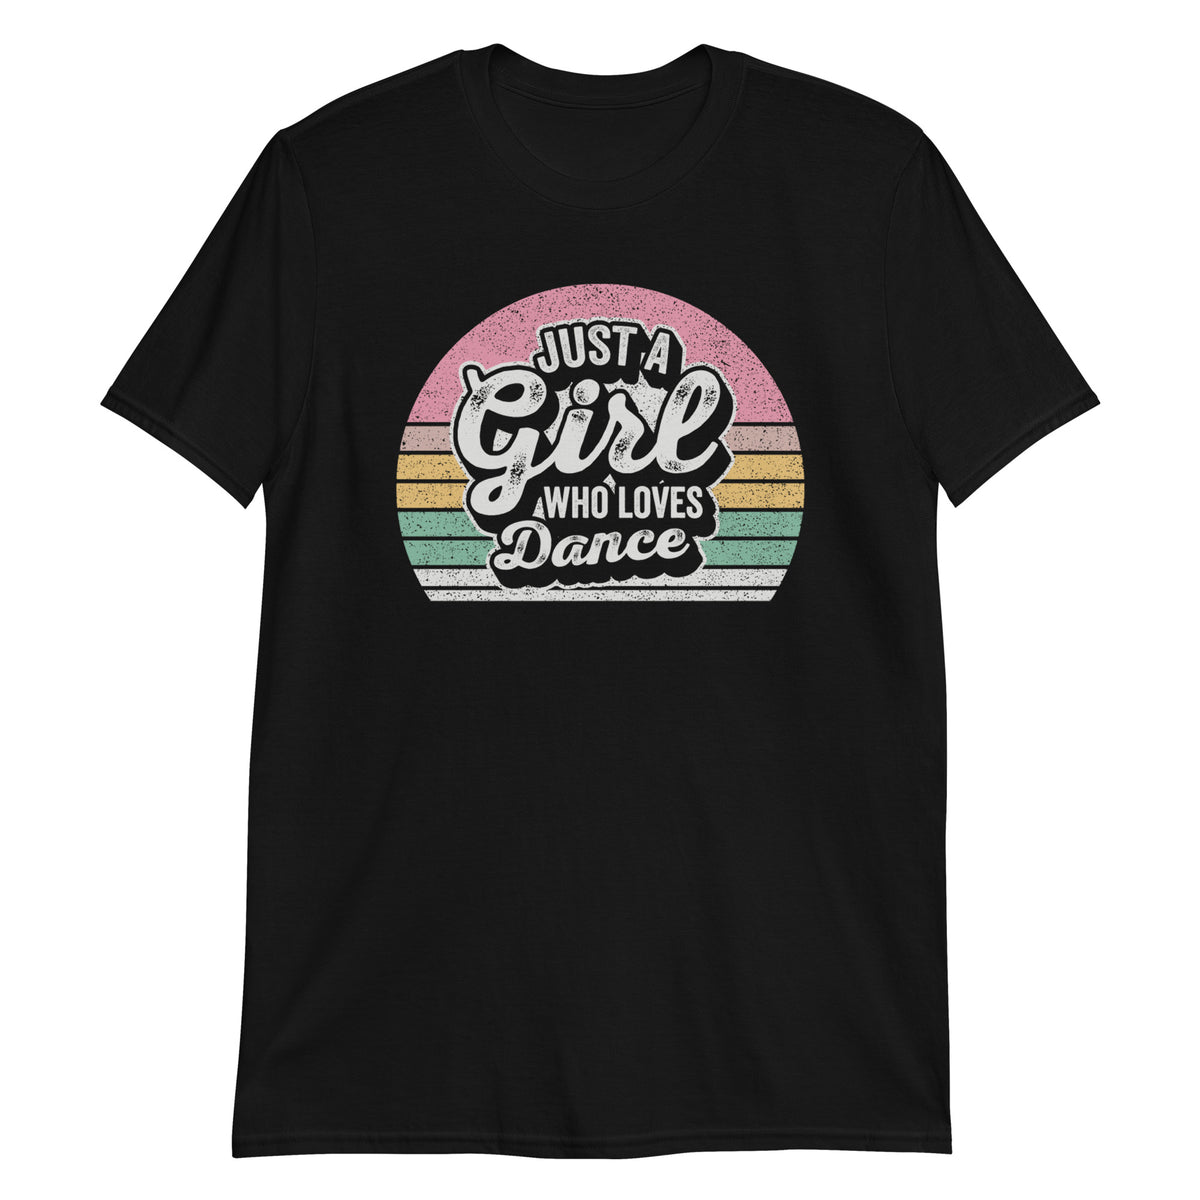 Just A Girl Who Loves Dance Dancing Funny Retro Vintage T-Shirt